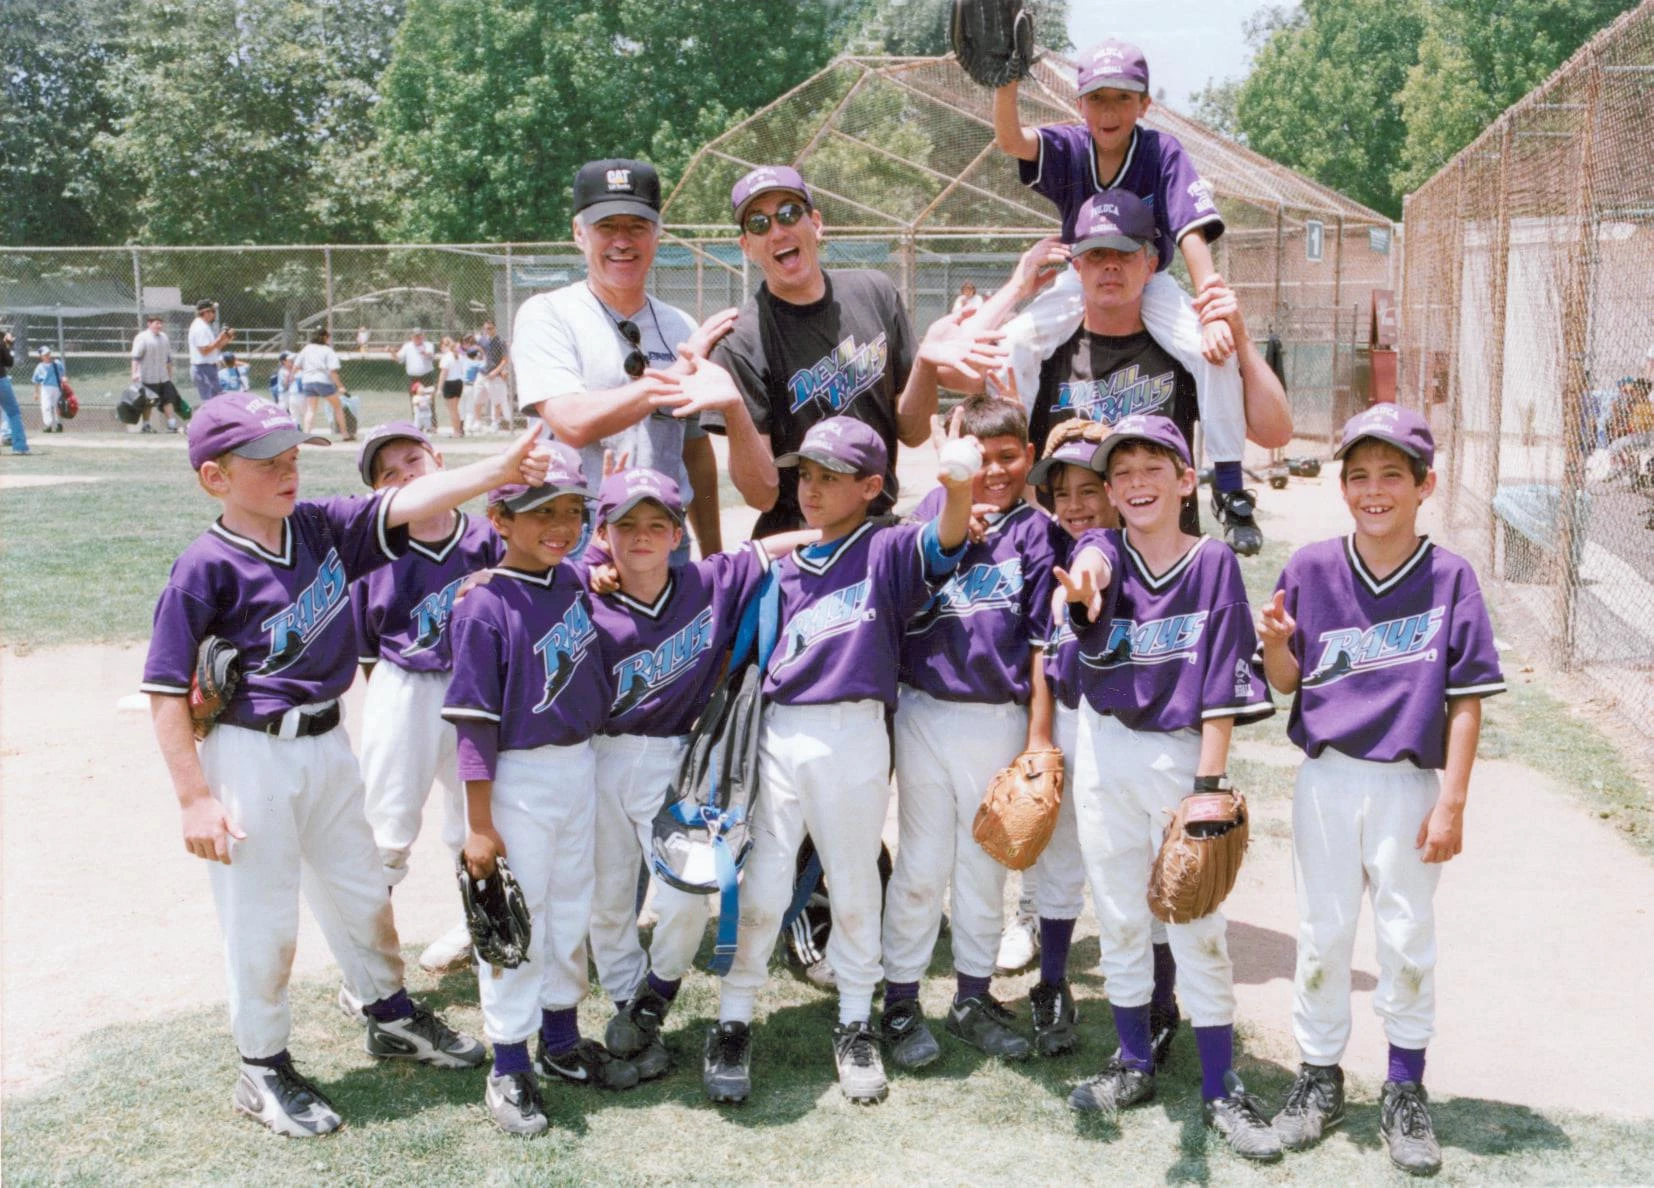 An Alex Trebek Story You Haven’t Heard Before: That Time He Coached
a Little League Team